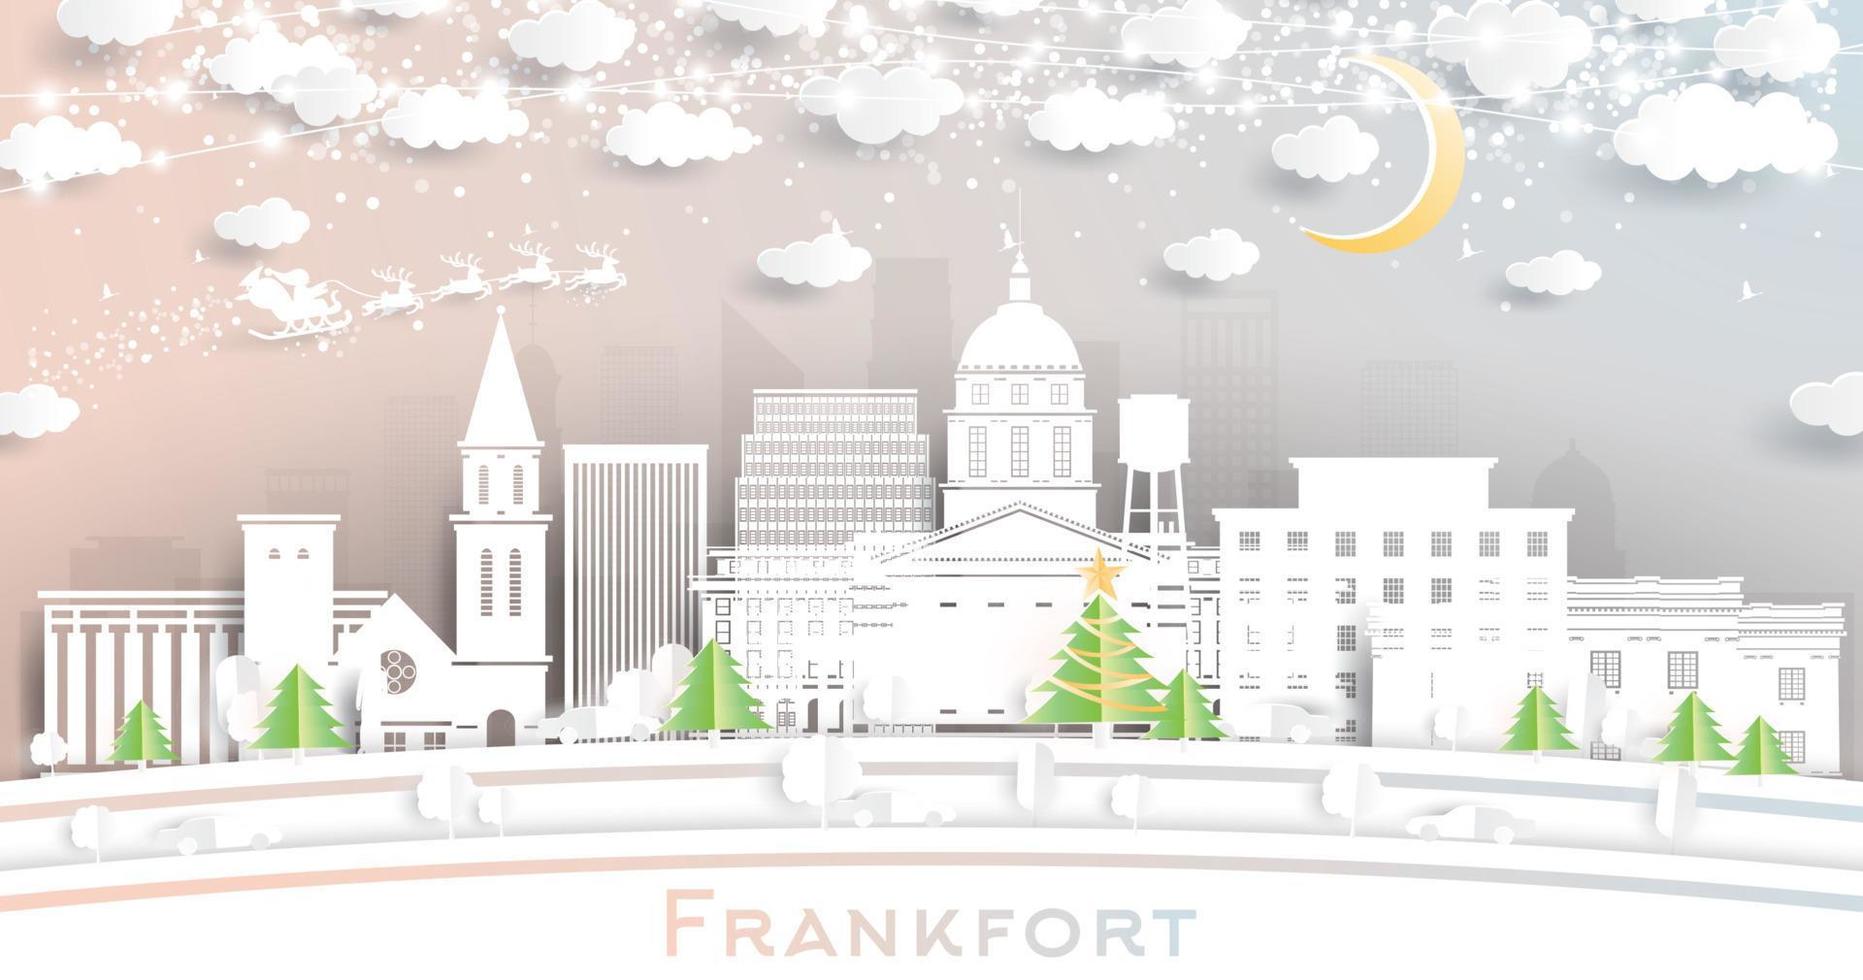 Frankfort Kentucky USA City Skyline in Paper Cut Style with Snowflakes, Moon and Neon Garland. vector